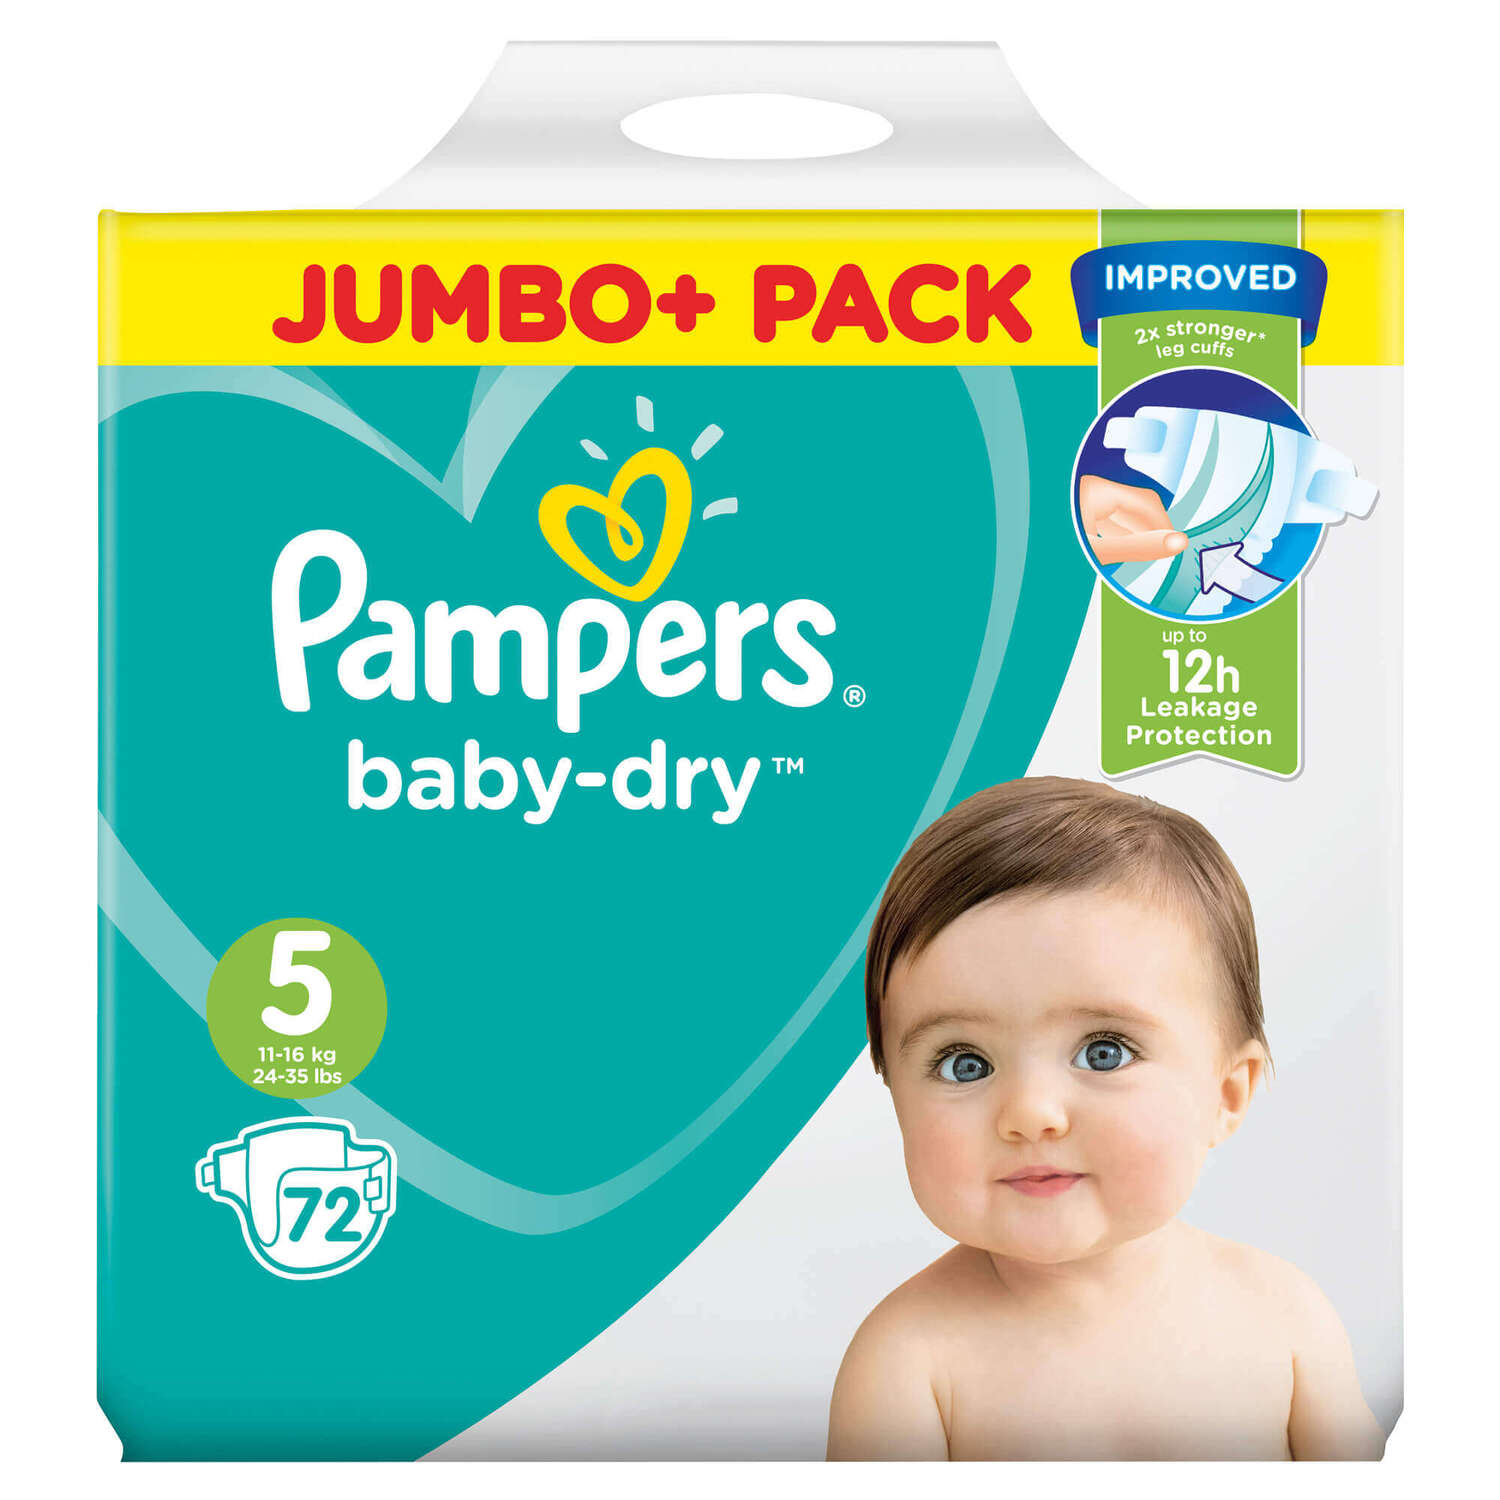 Montgomery Dollar Matroos Pampers Baby-Dry Nappies Size 5 Junior 72 Pack - Gompels HealthCare